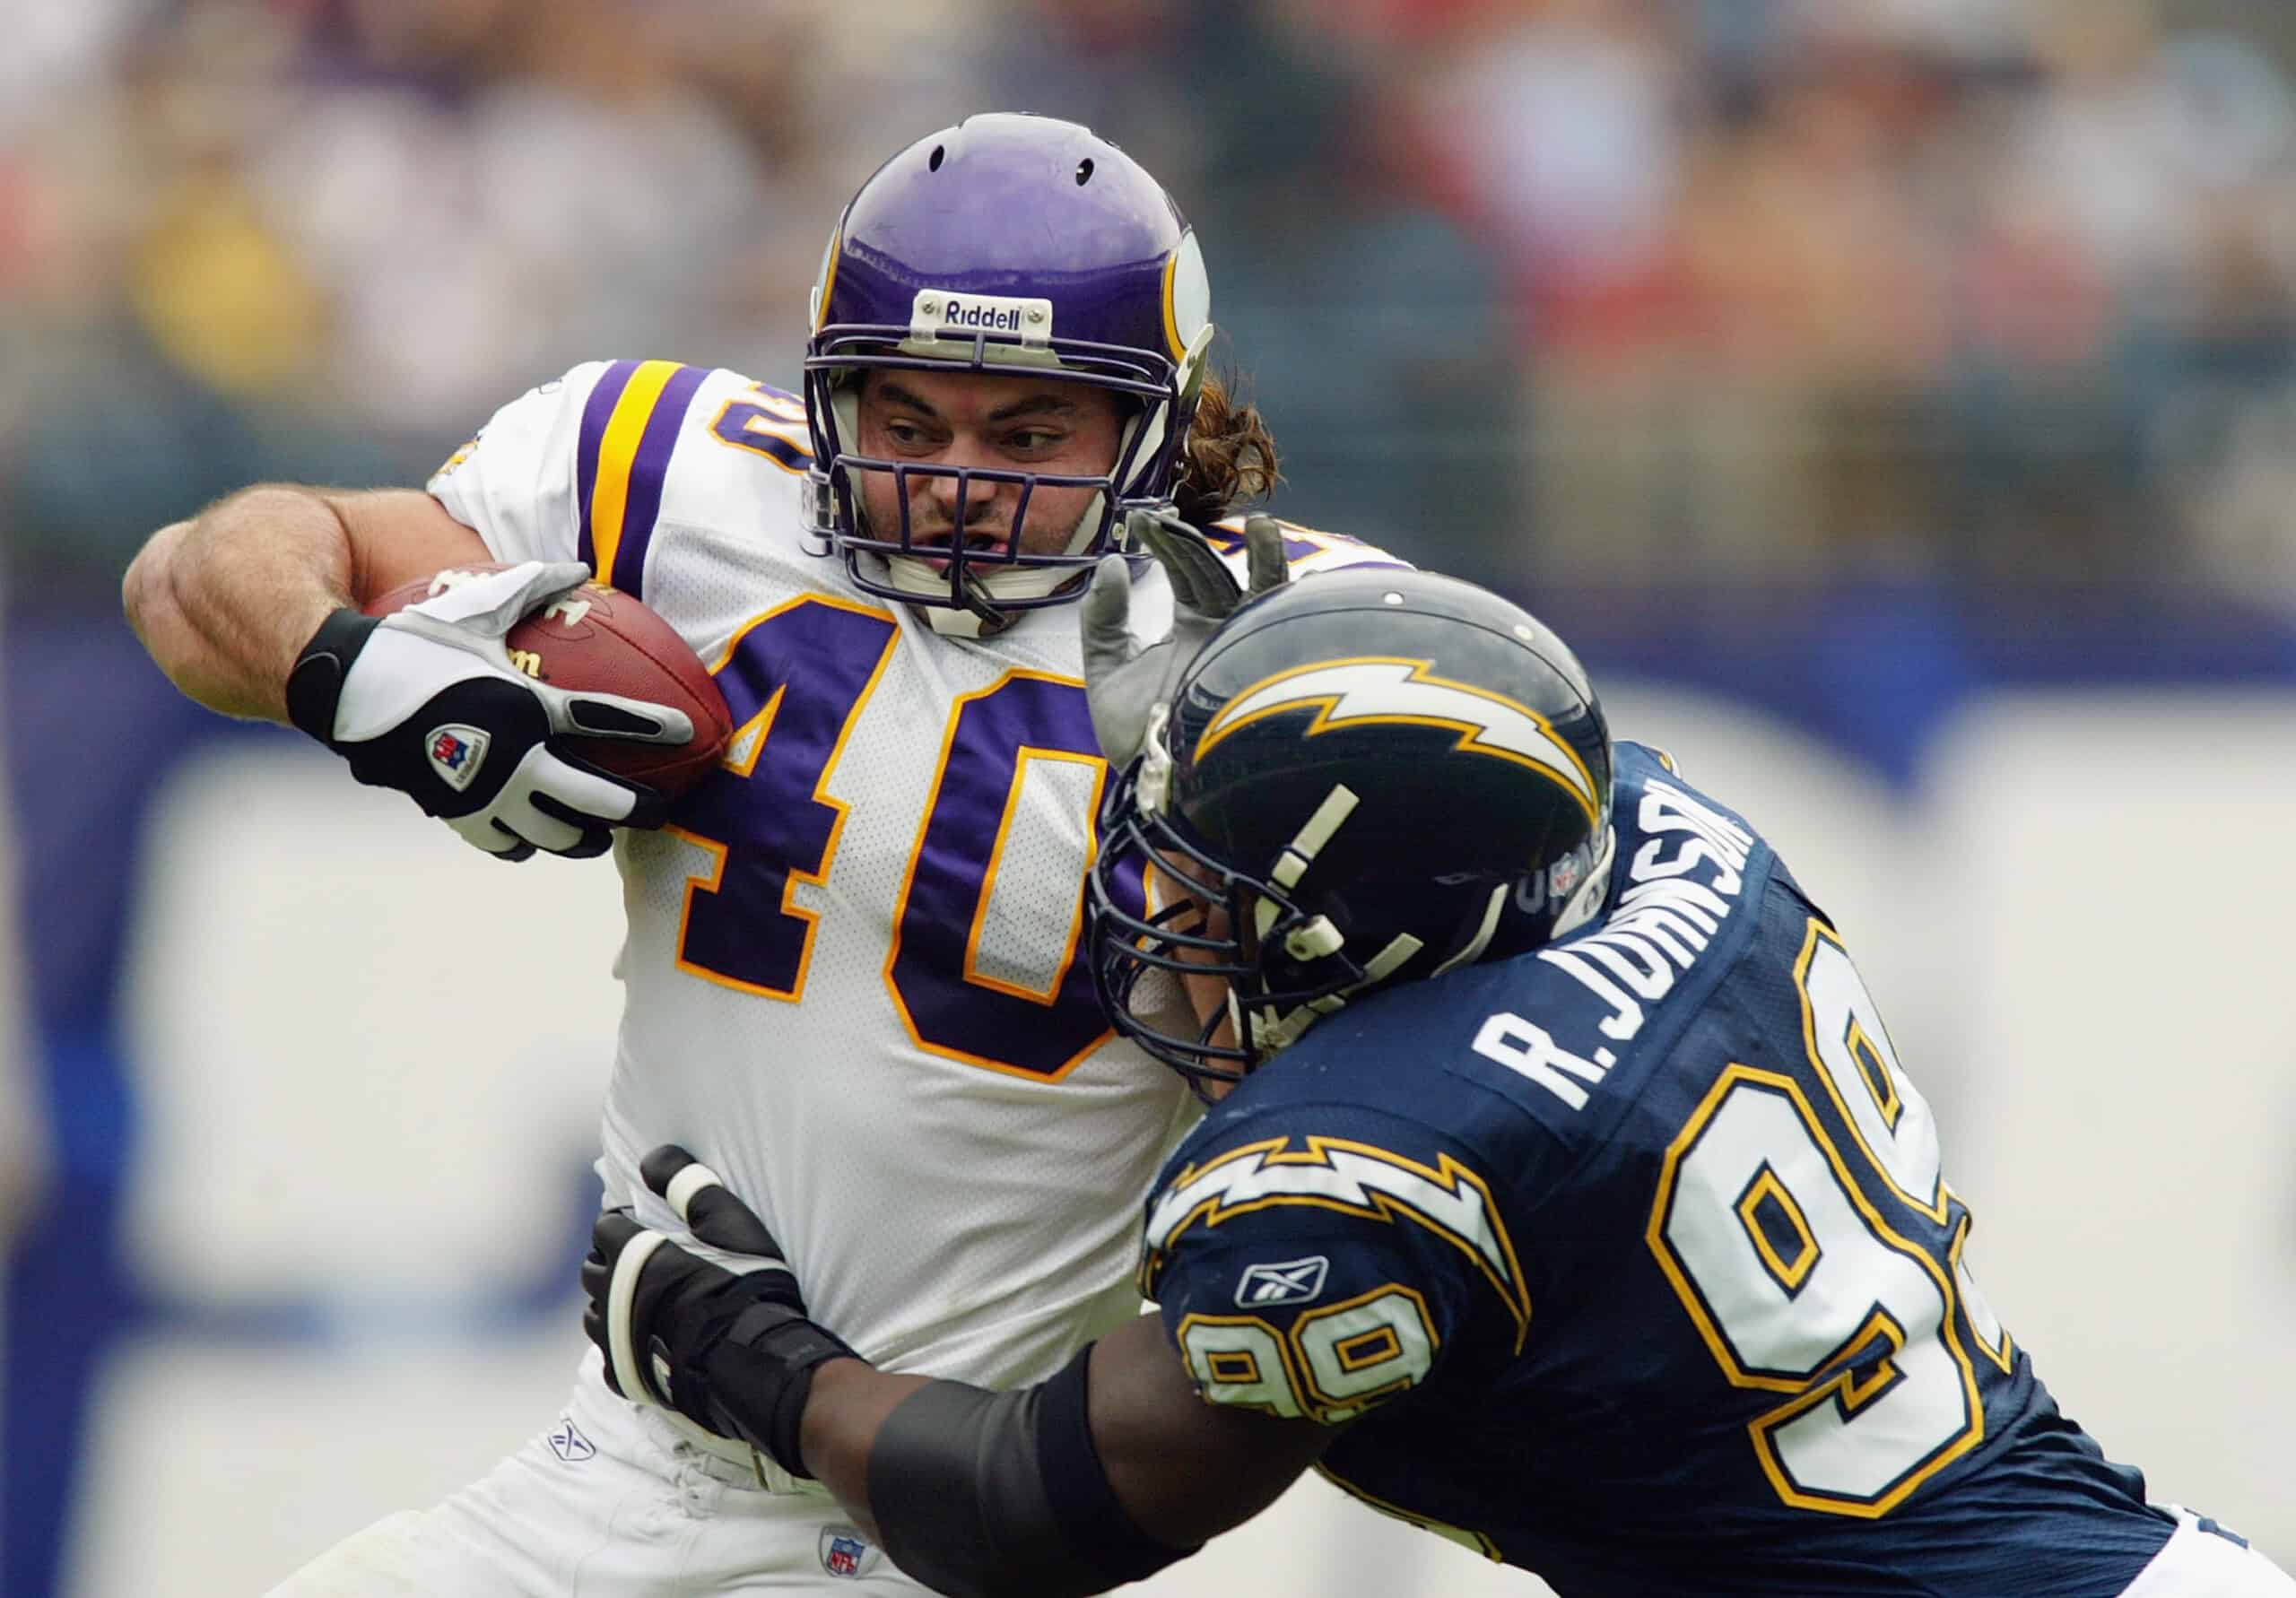 SAN DIEGO - NOVEMBER 9: Jim Kleinsasser #40 of the Minnesota Vikings carries the ball against Raylee Johnson #99 of the San Diego Chargers on November 9, 2003 at Qualcomm Stadium in San Diego, California. The Chargers defeated the Vikings 42-28. (Photo by Donald Miralle/Getty Images)